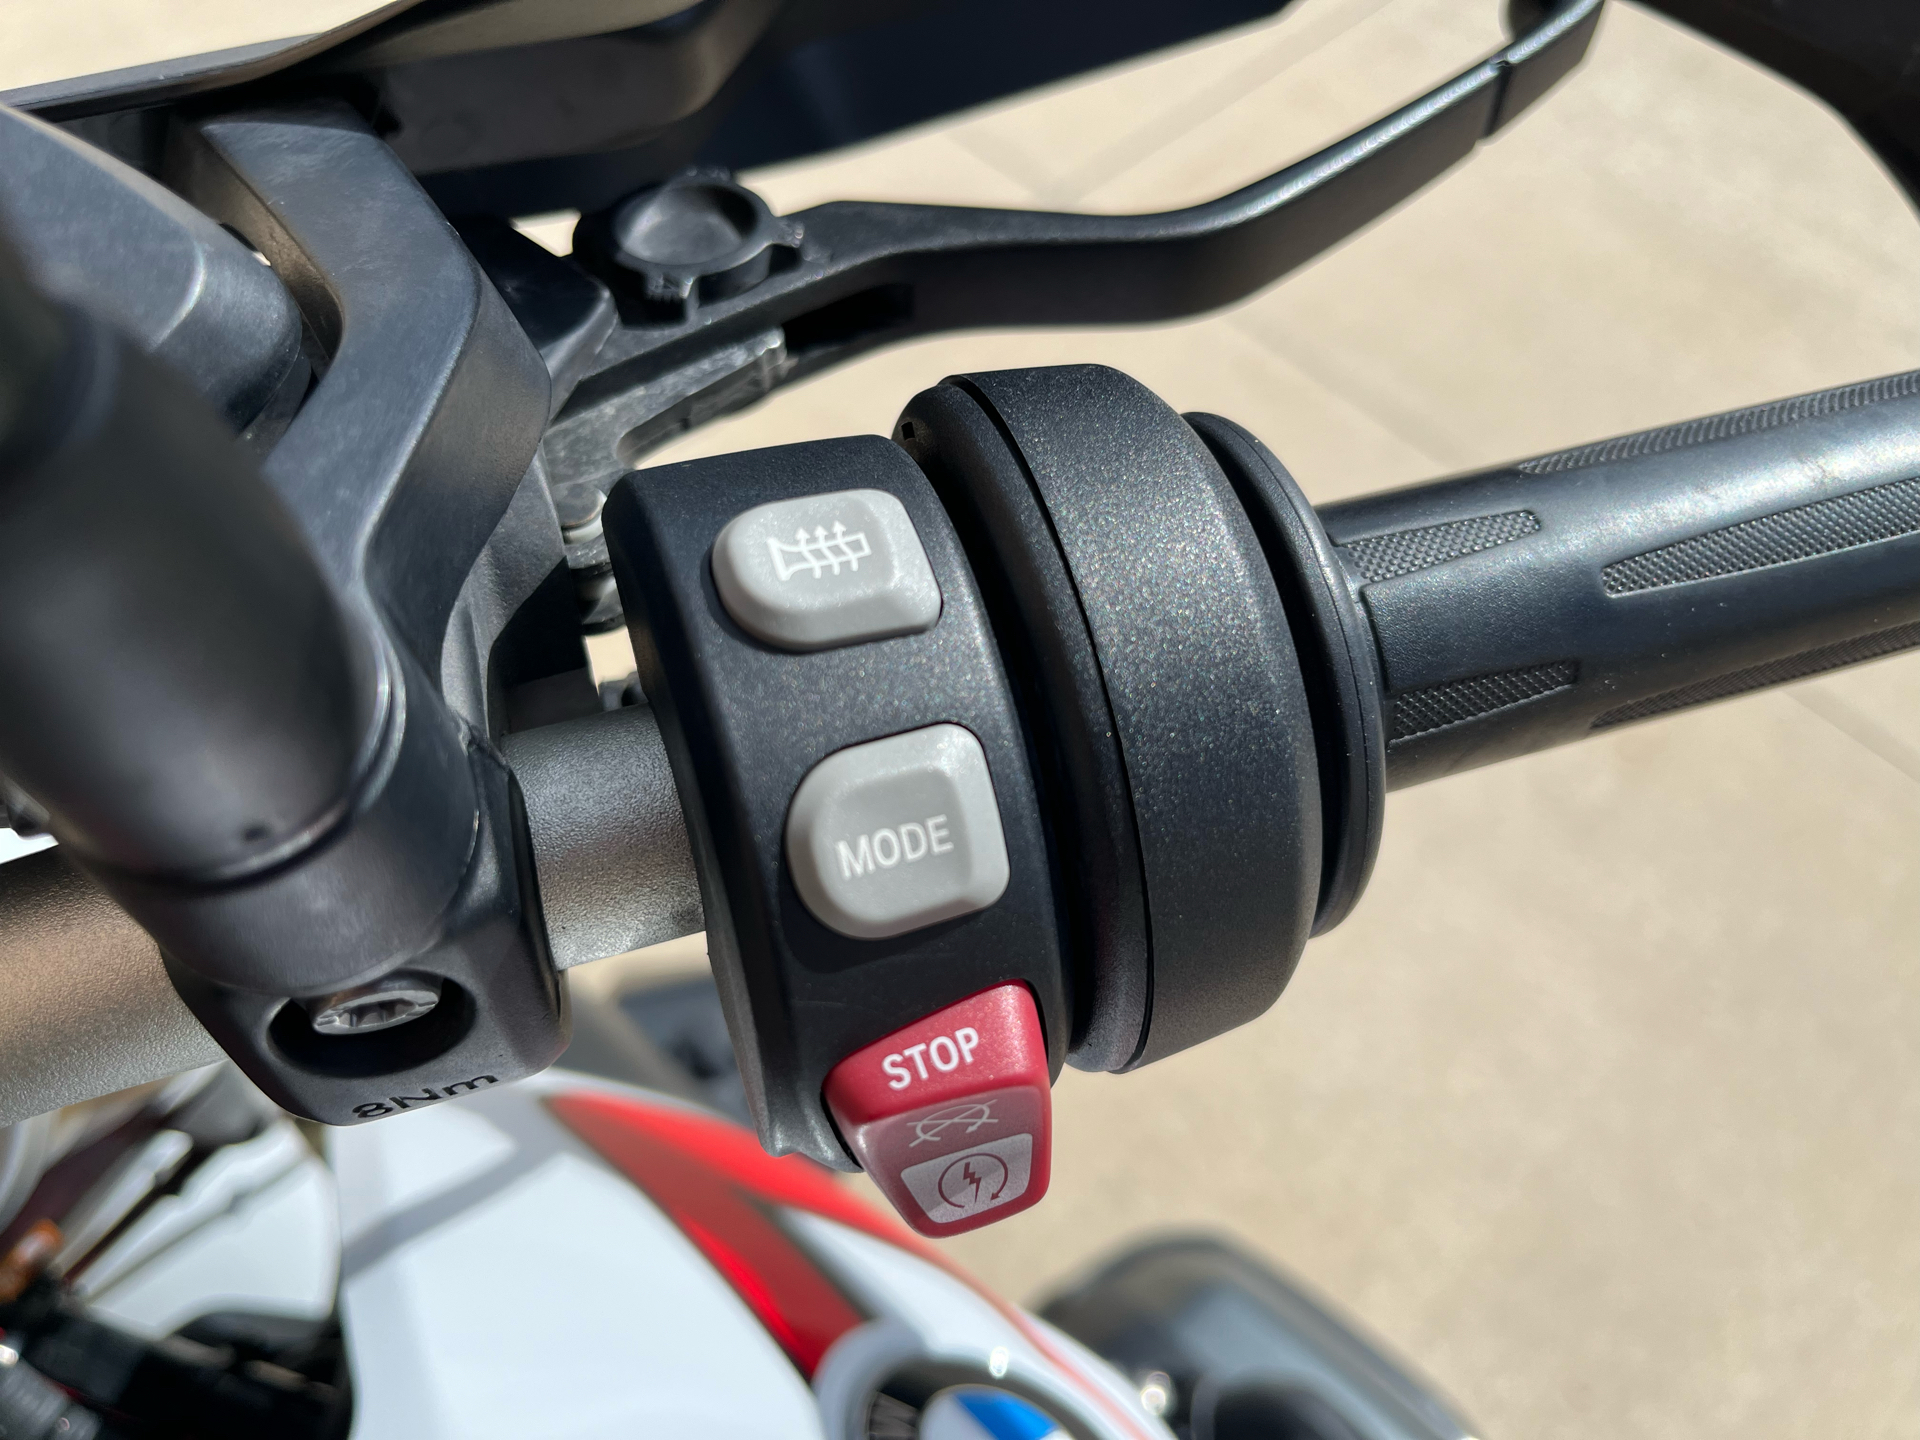 2015 BMW R 1200 R in Roselle, Illinois - Photo 7